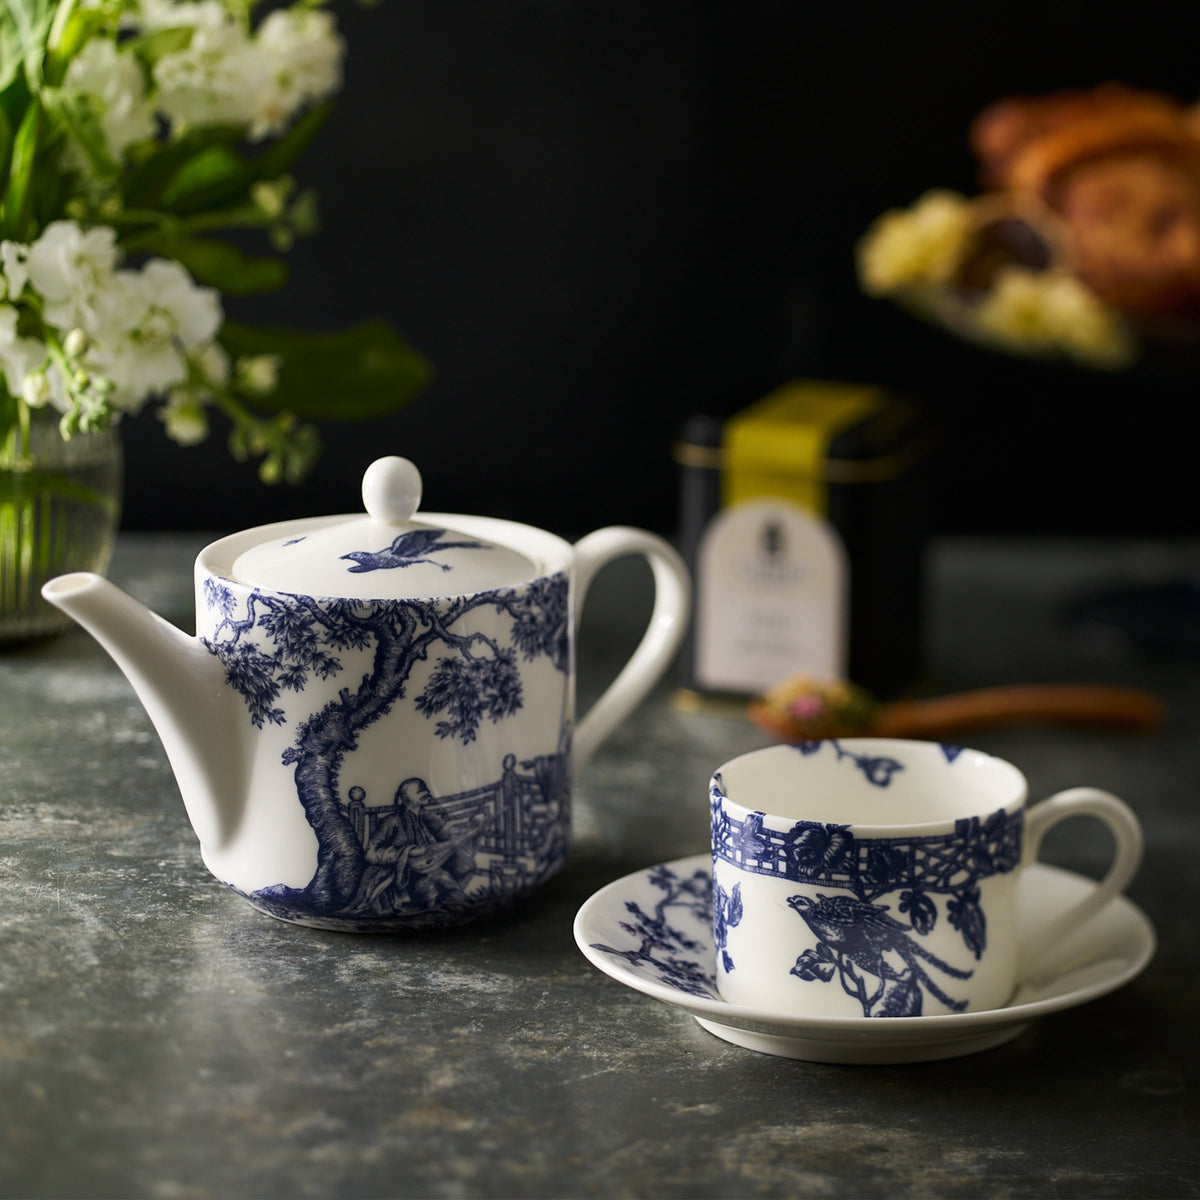 A hand decorated Caskata Chinoiserie Toile Petite Teapot and saucer on a table.